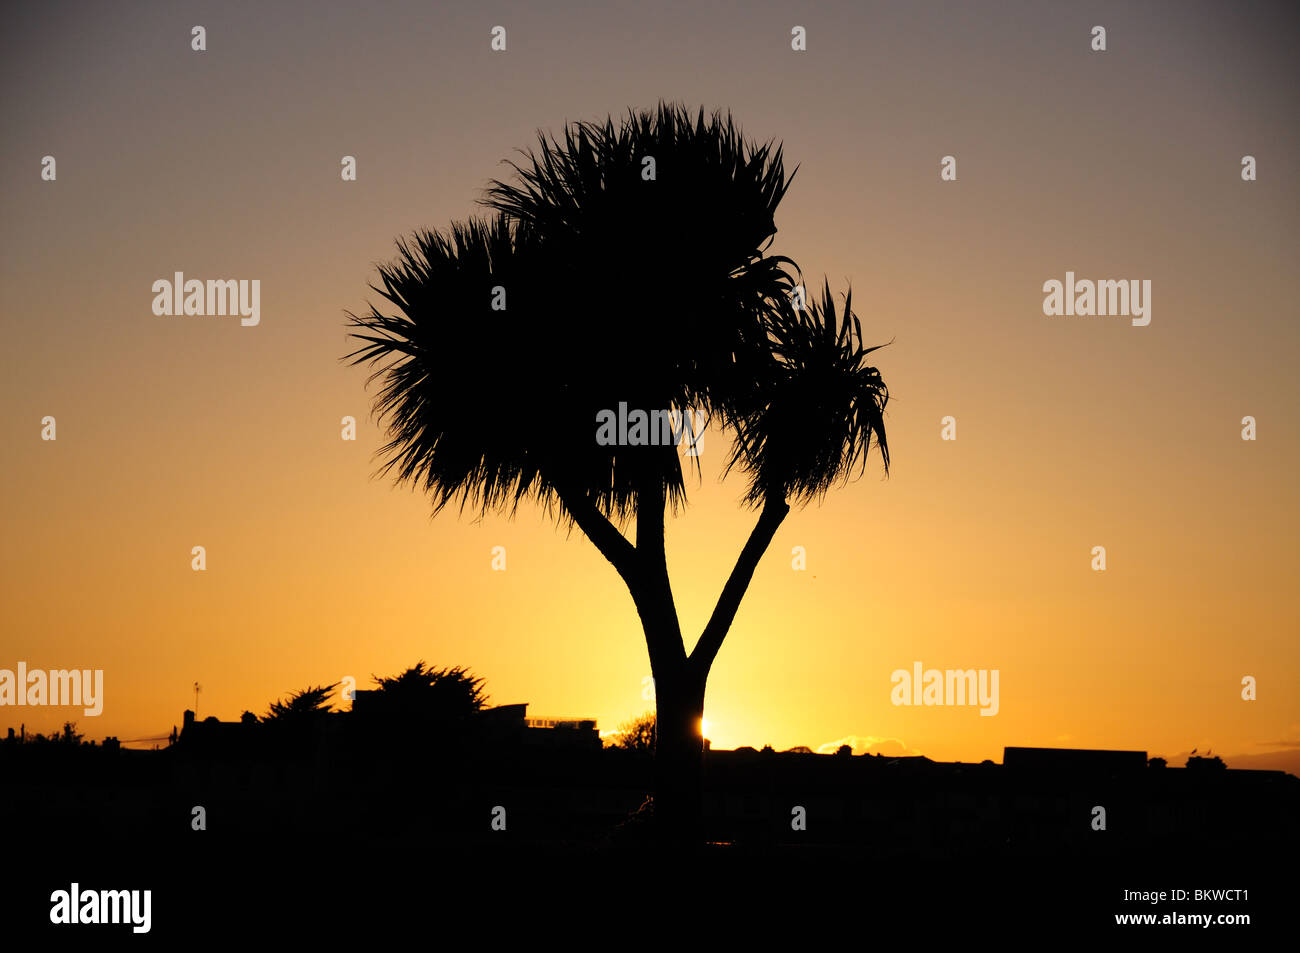 Palm tree silhouette at sunset Stock Photo